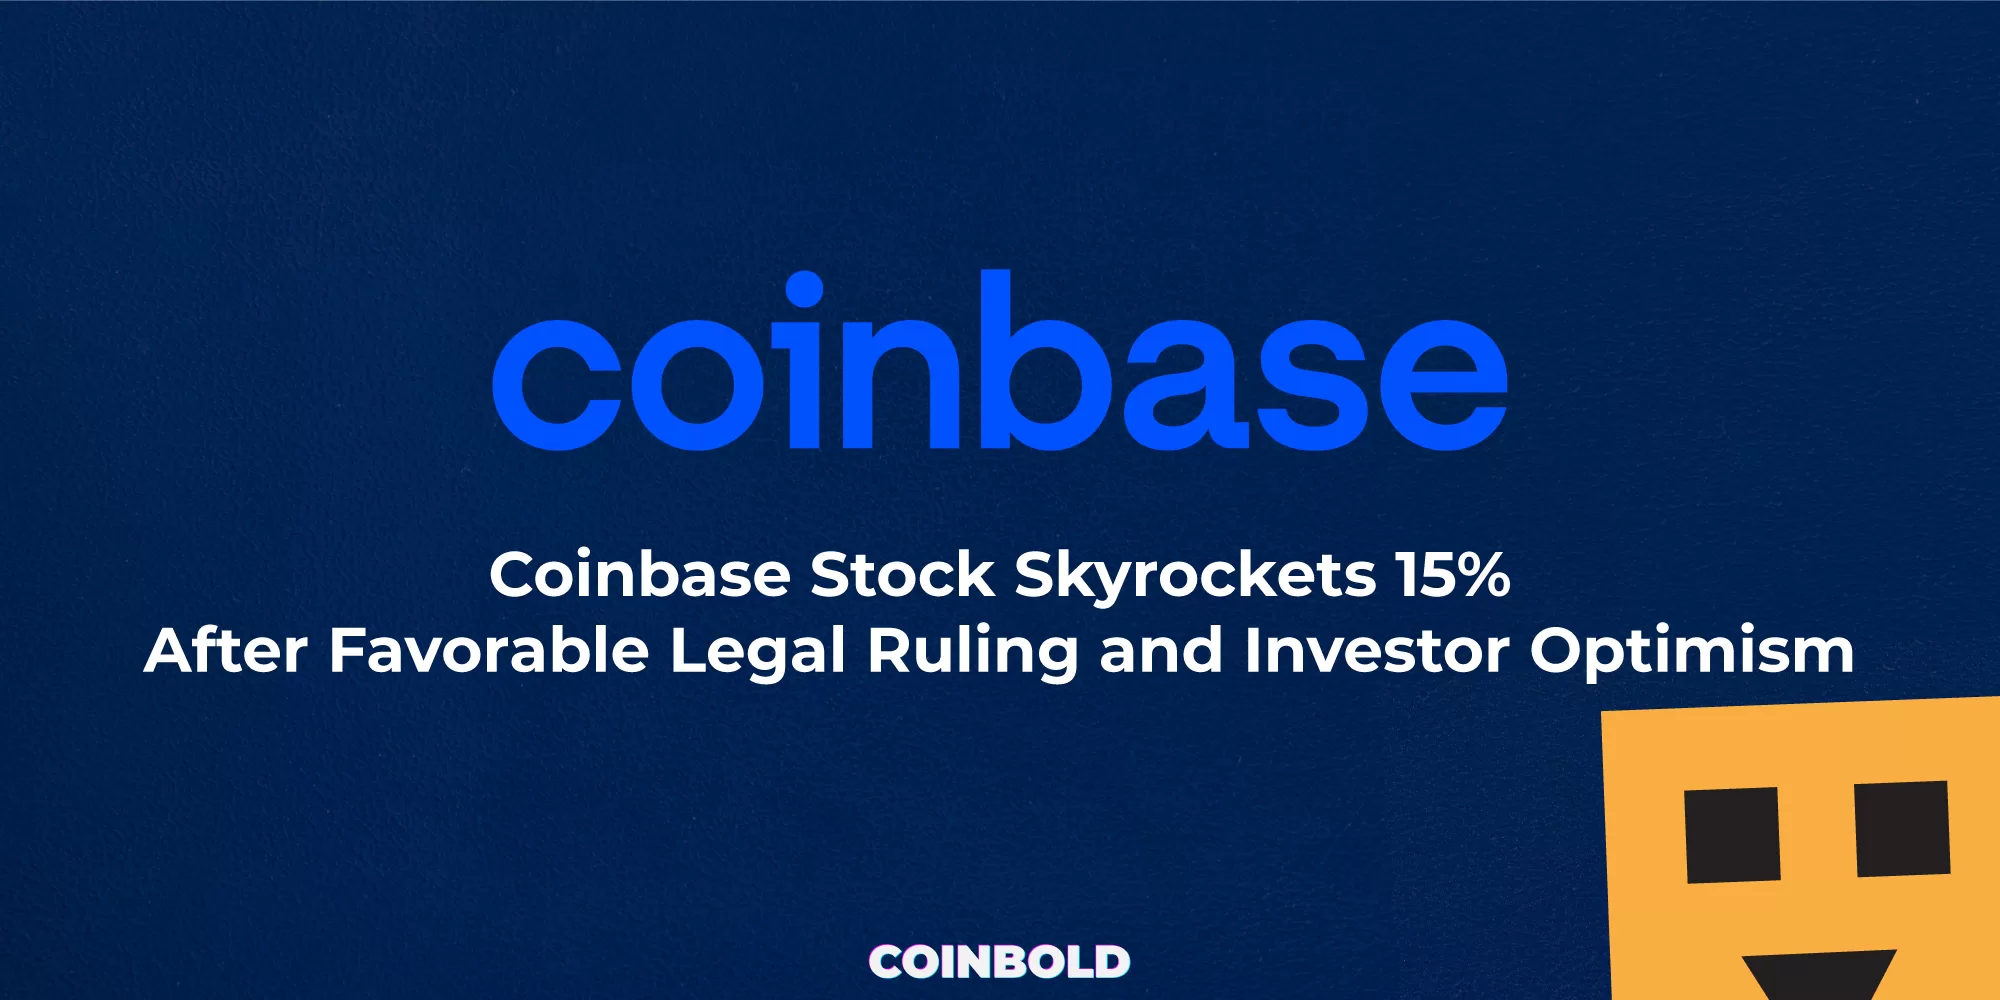 Coinbase Stock Skyrockets 15% After Favorable Legal Ruling and Investor Optimism